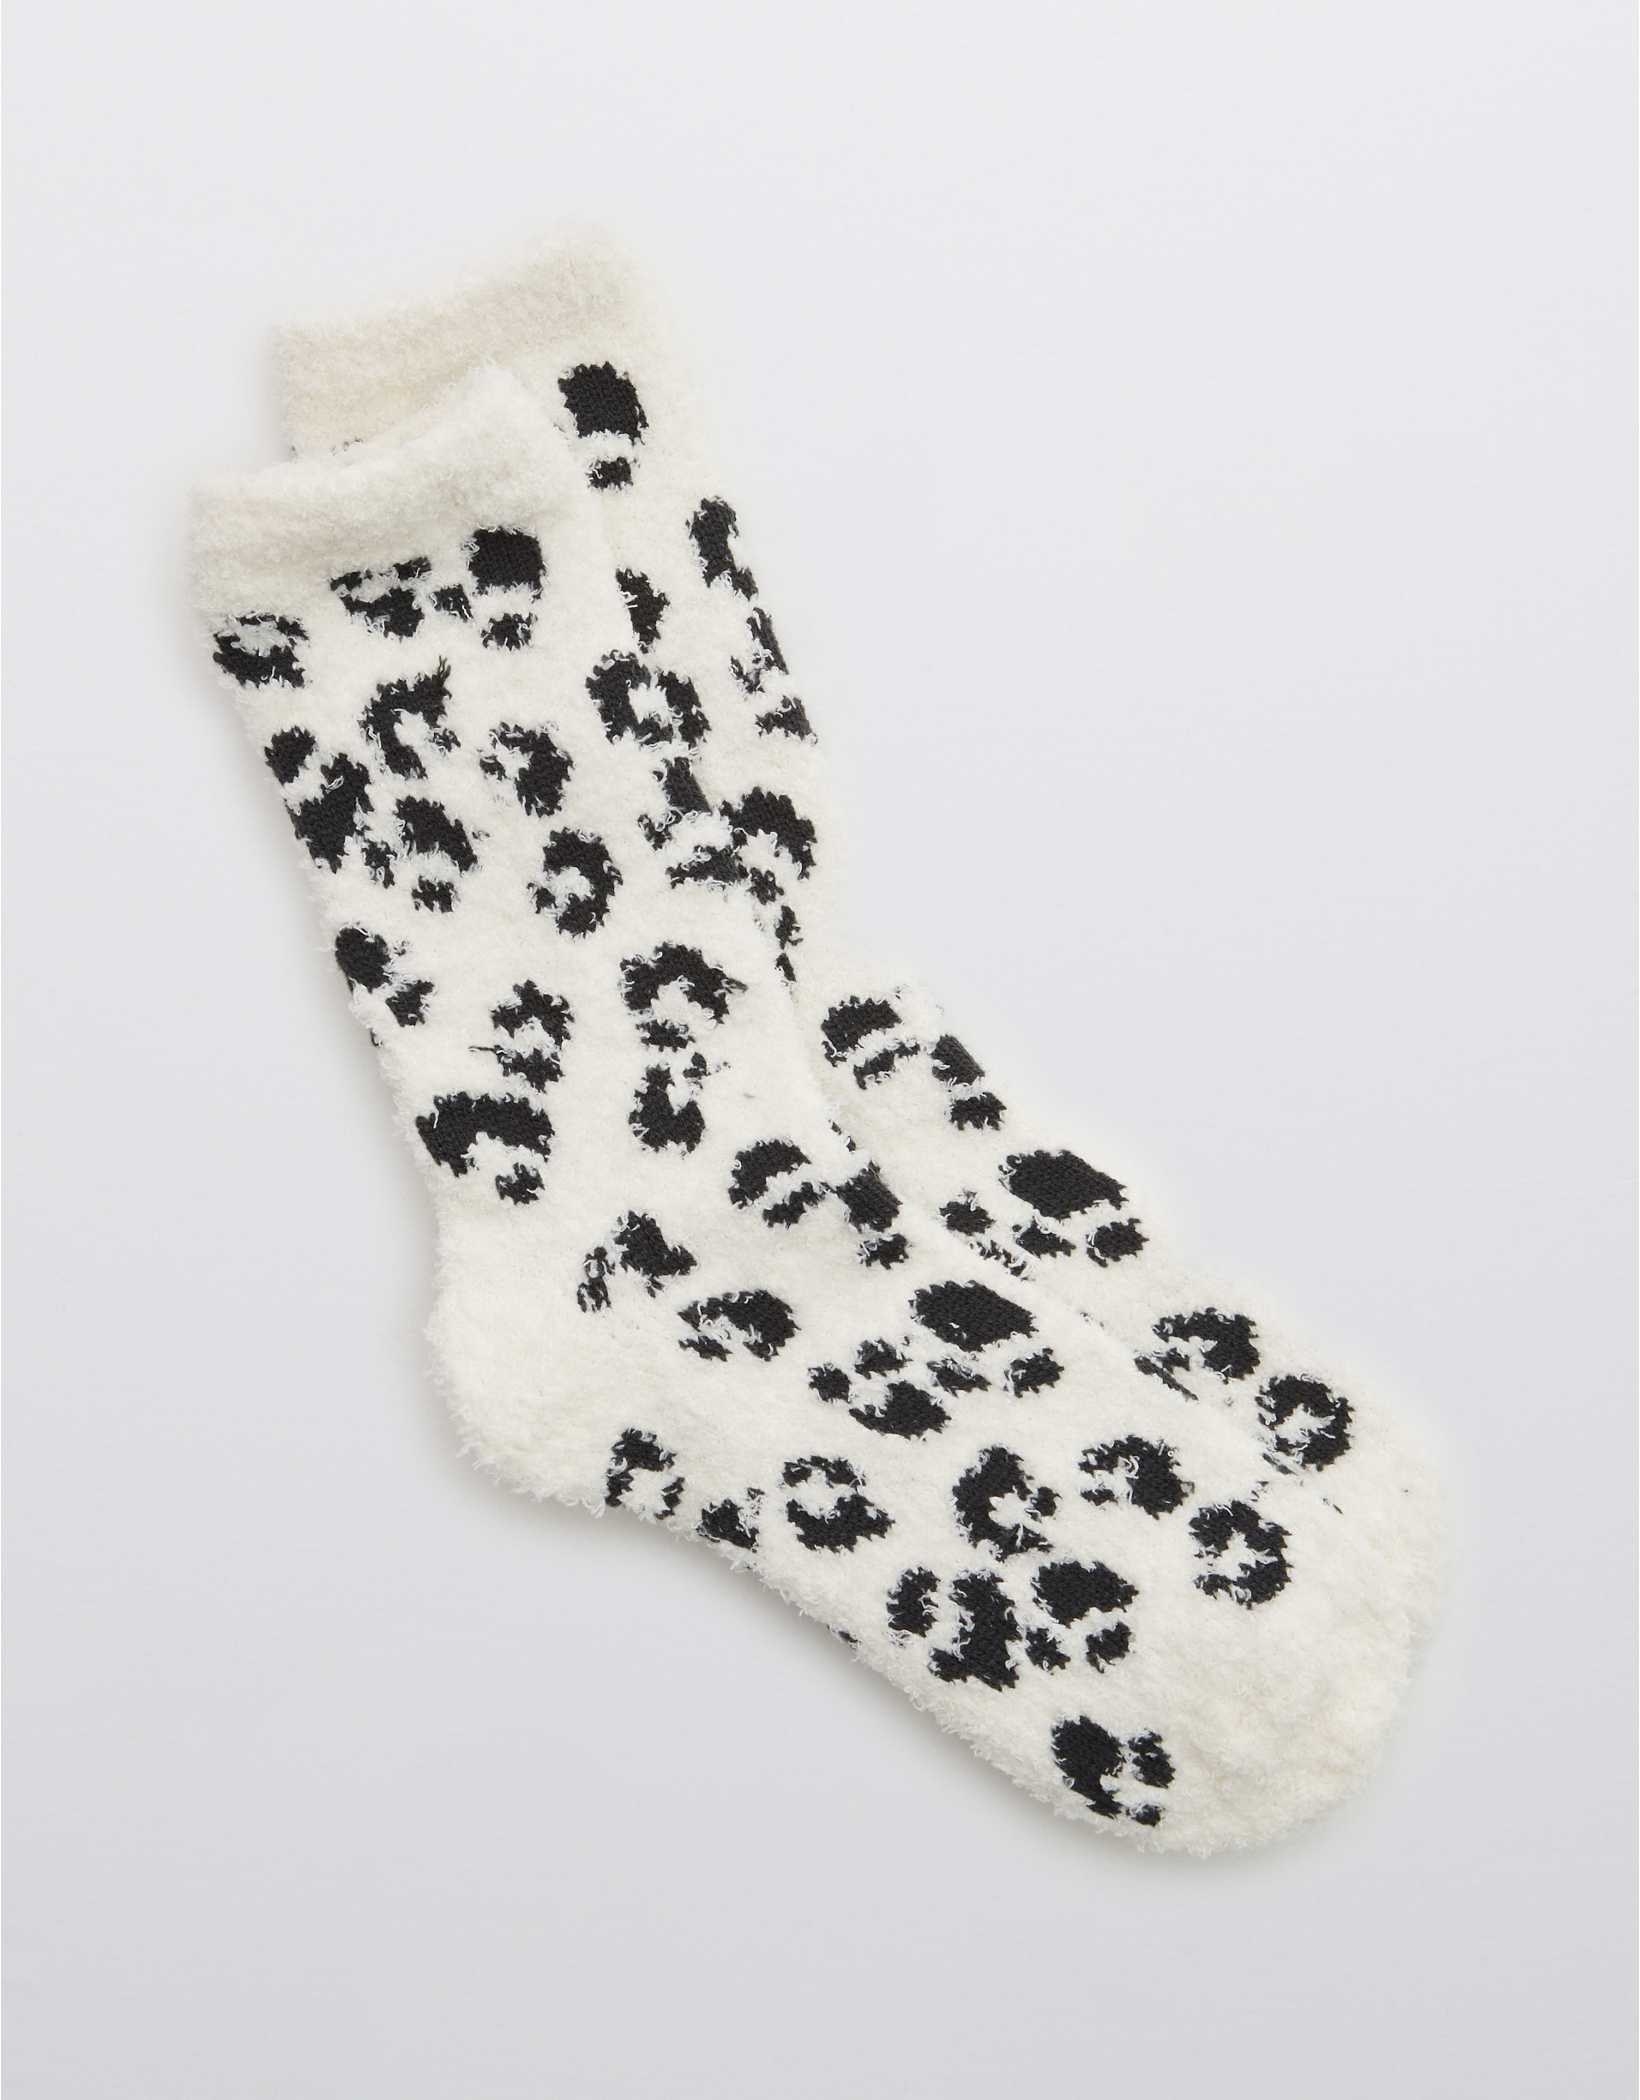 the socks in white with black spots